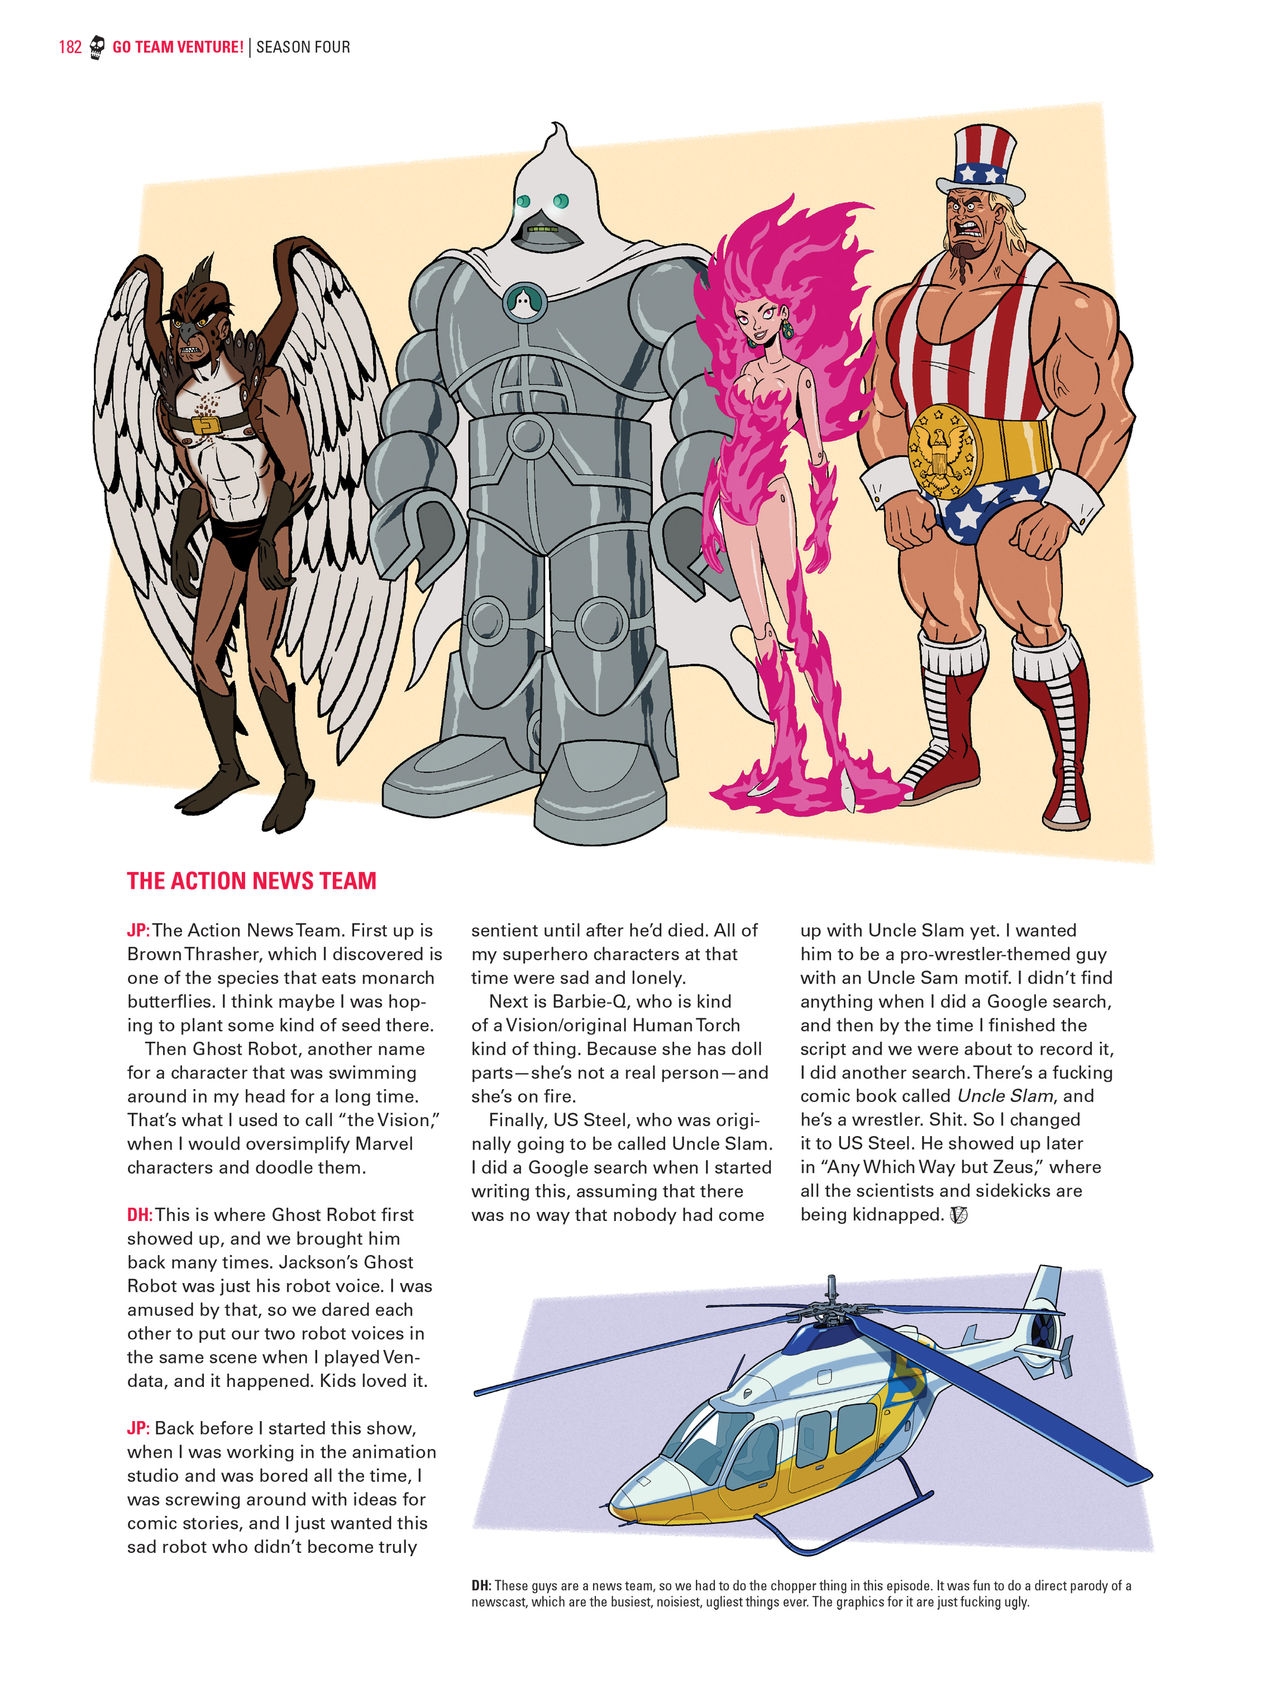 Go Team Venture! - The Art and Making of the Venture Bros 180